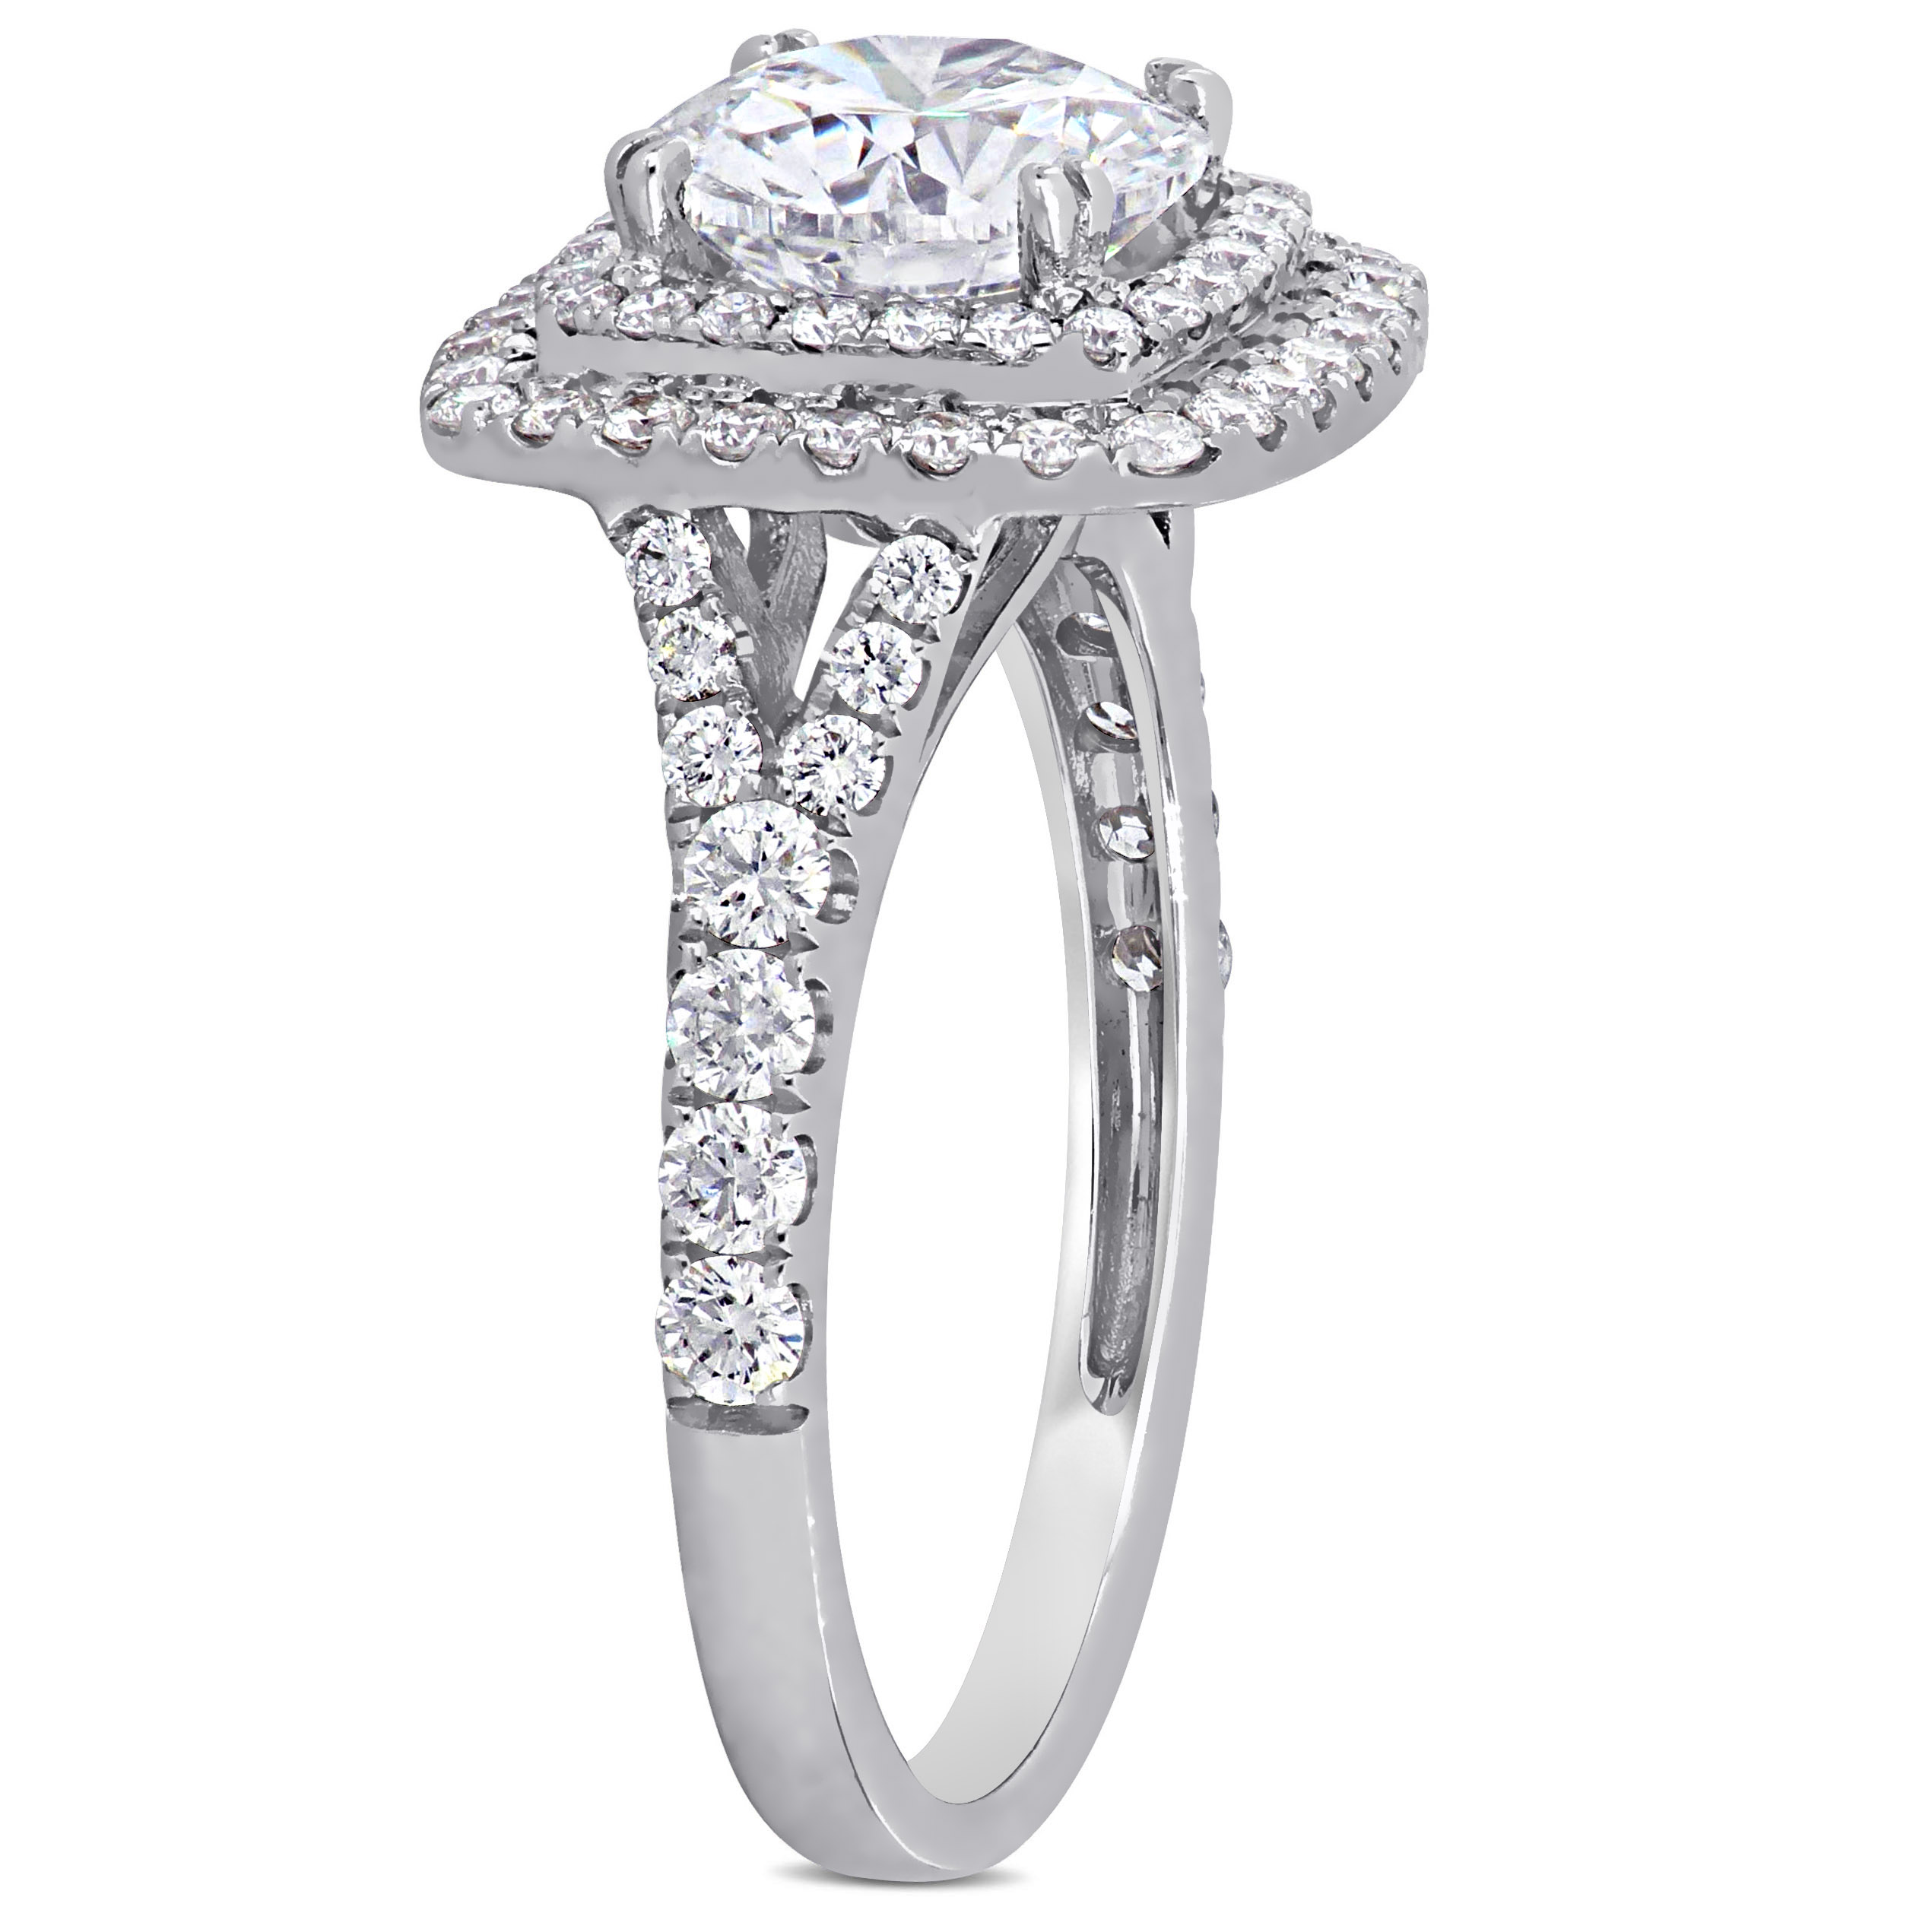 2-4/5 CT TW Diamond Double Halo Engagement Ring in 14k White Gold